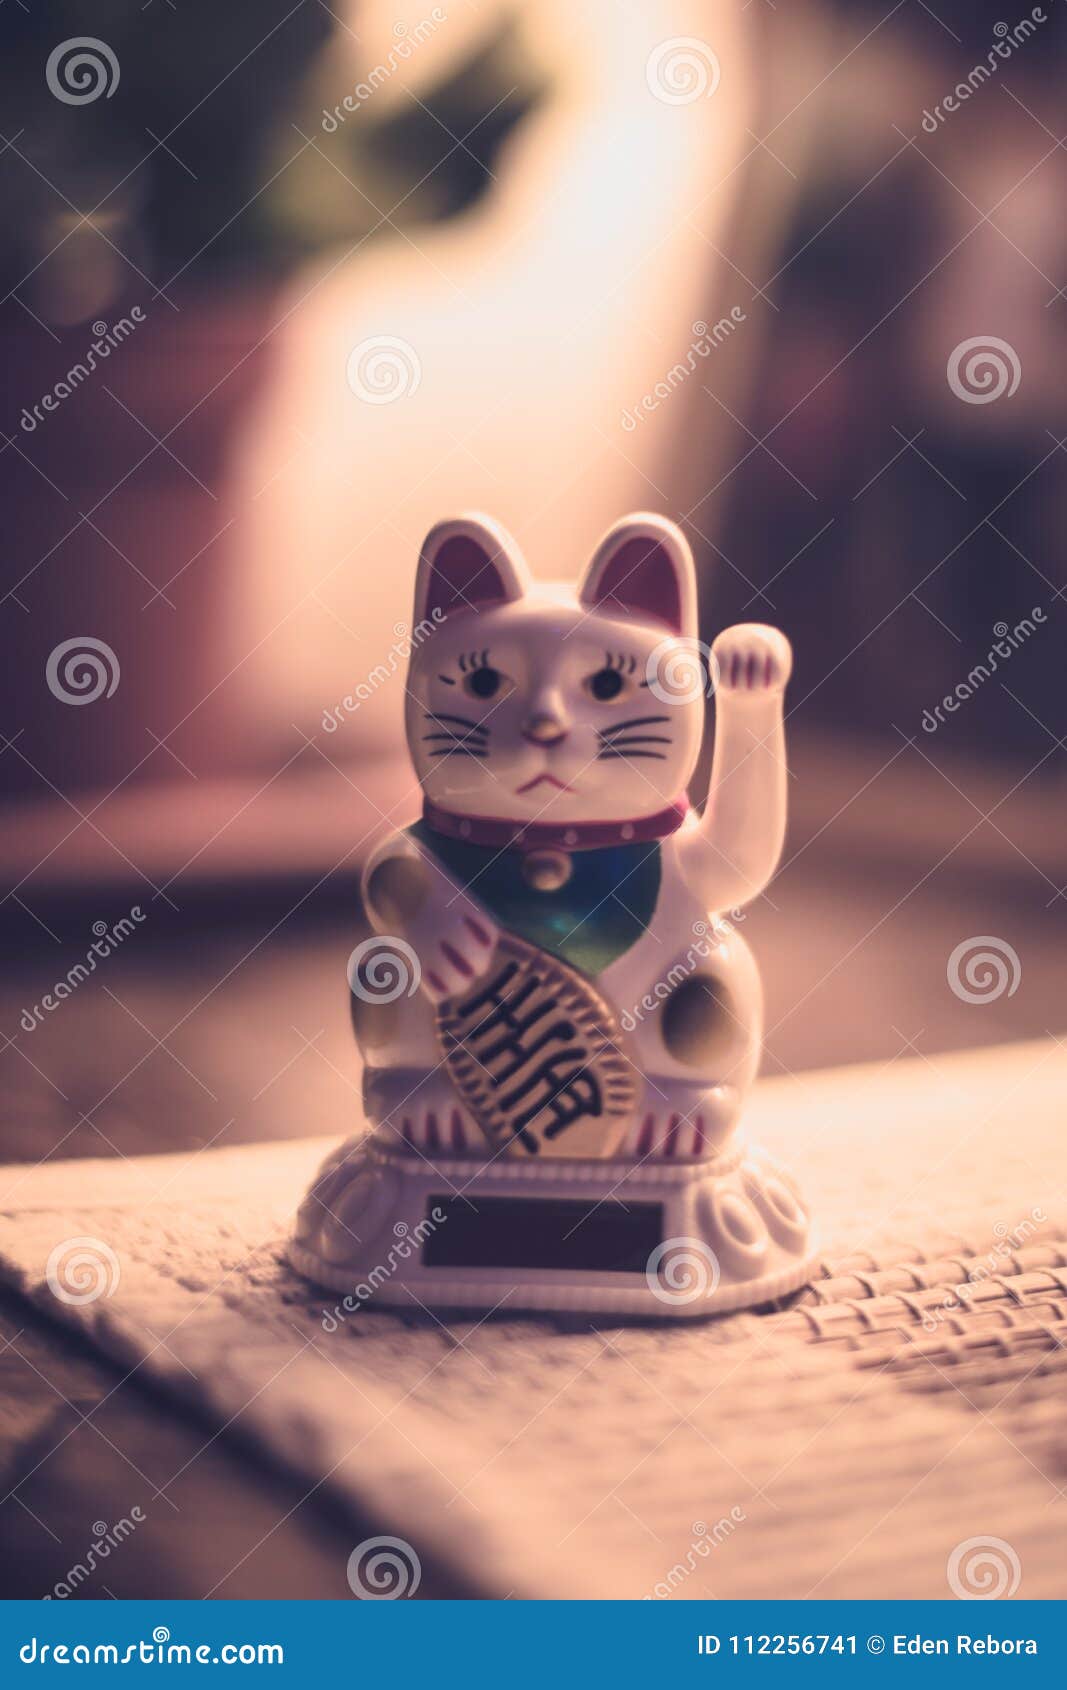 Chinese lucky cat stock image. Image of path, luck, lucky - 112256741